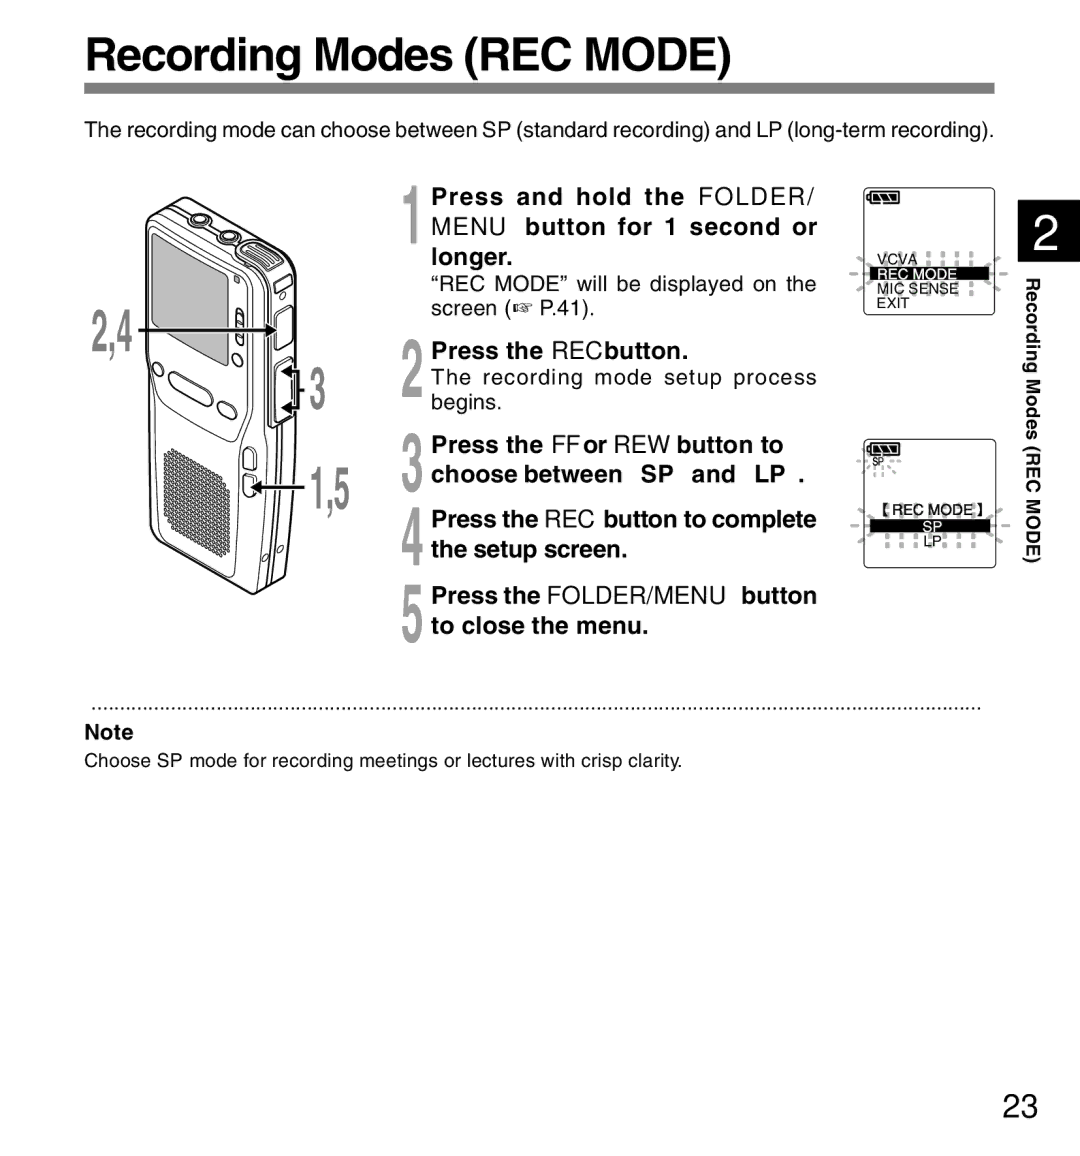 Olympus DS-2300 manual Recording Modes REC Mode, 2Press the REC button 